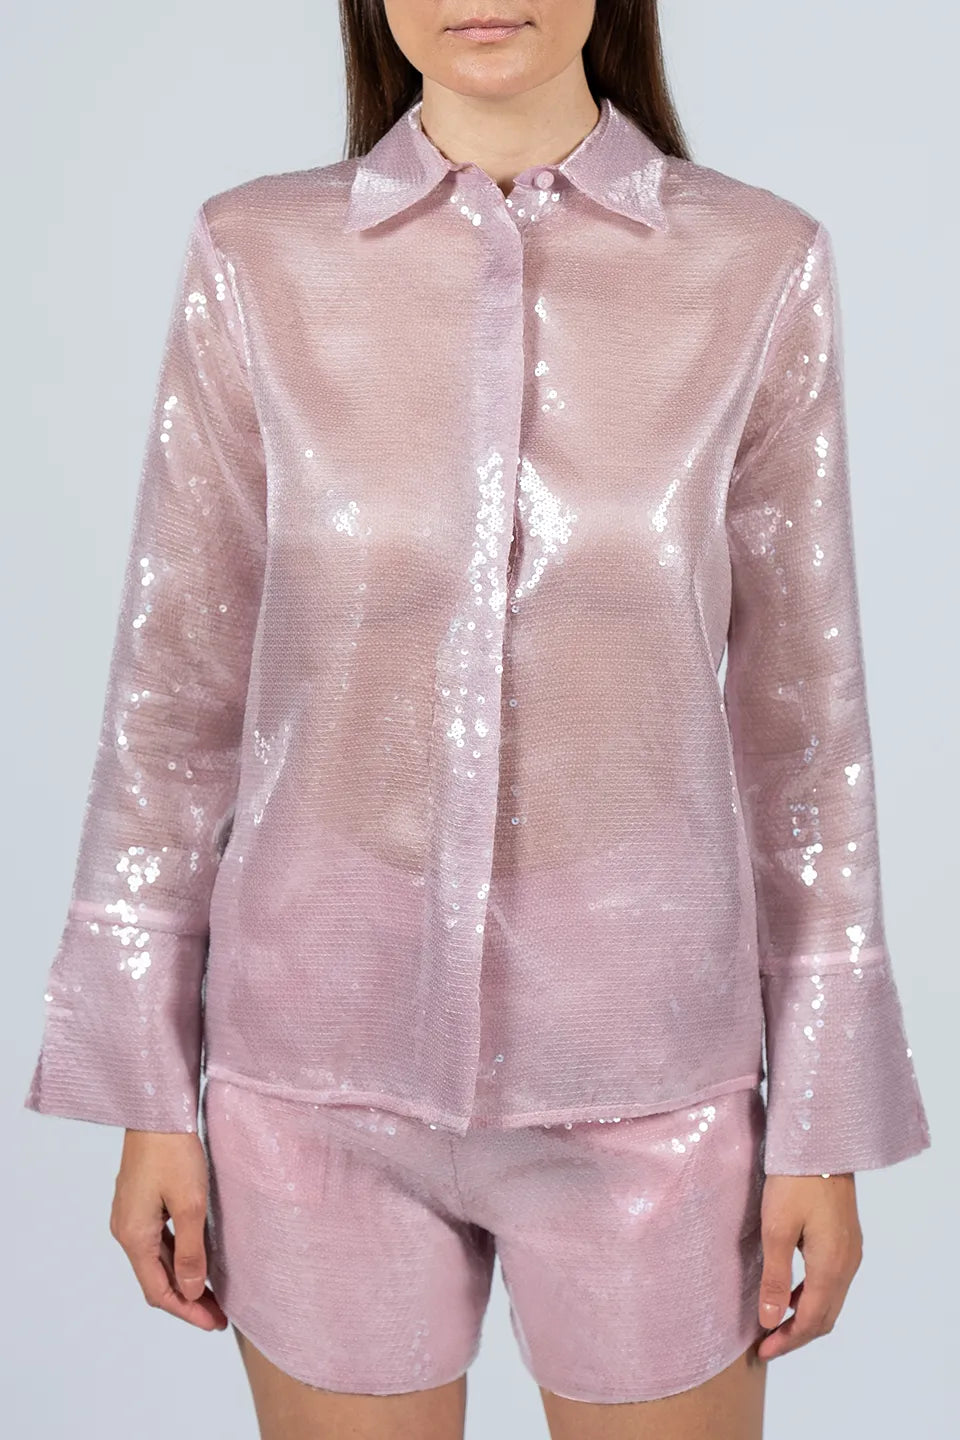 Shop online trendy Pink Shirt from Federica Tosi Fashion designer. Product gallery 1